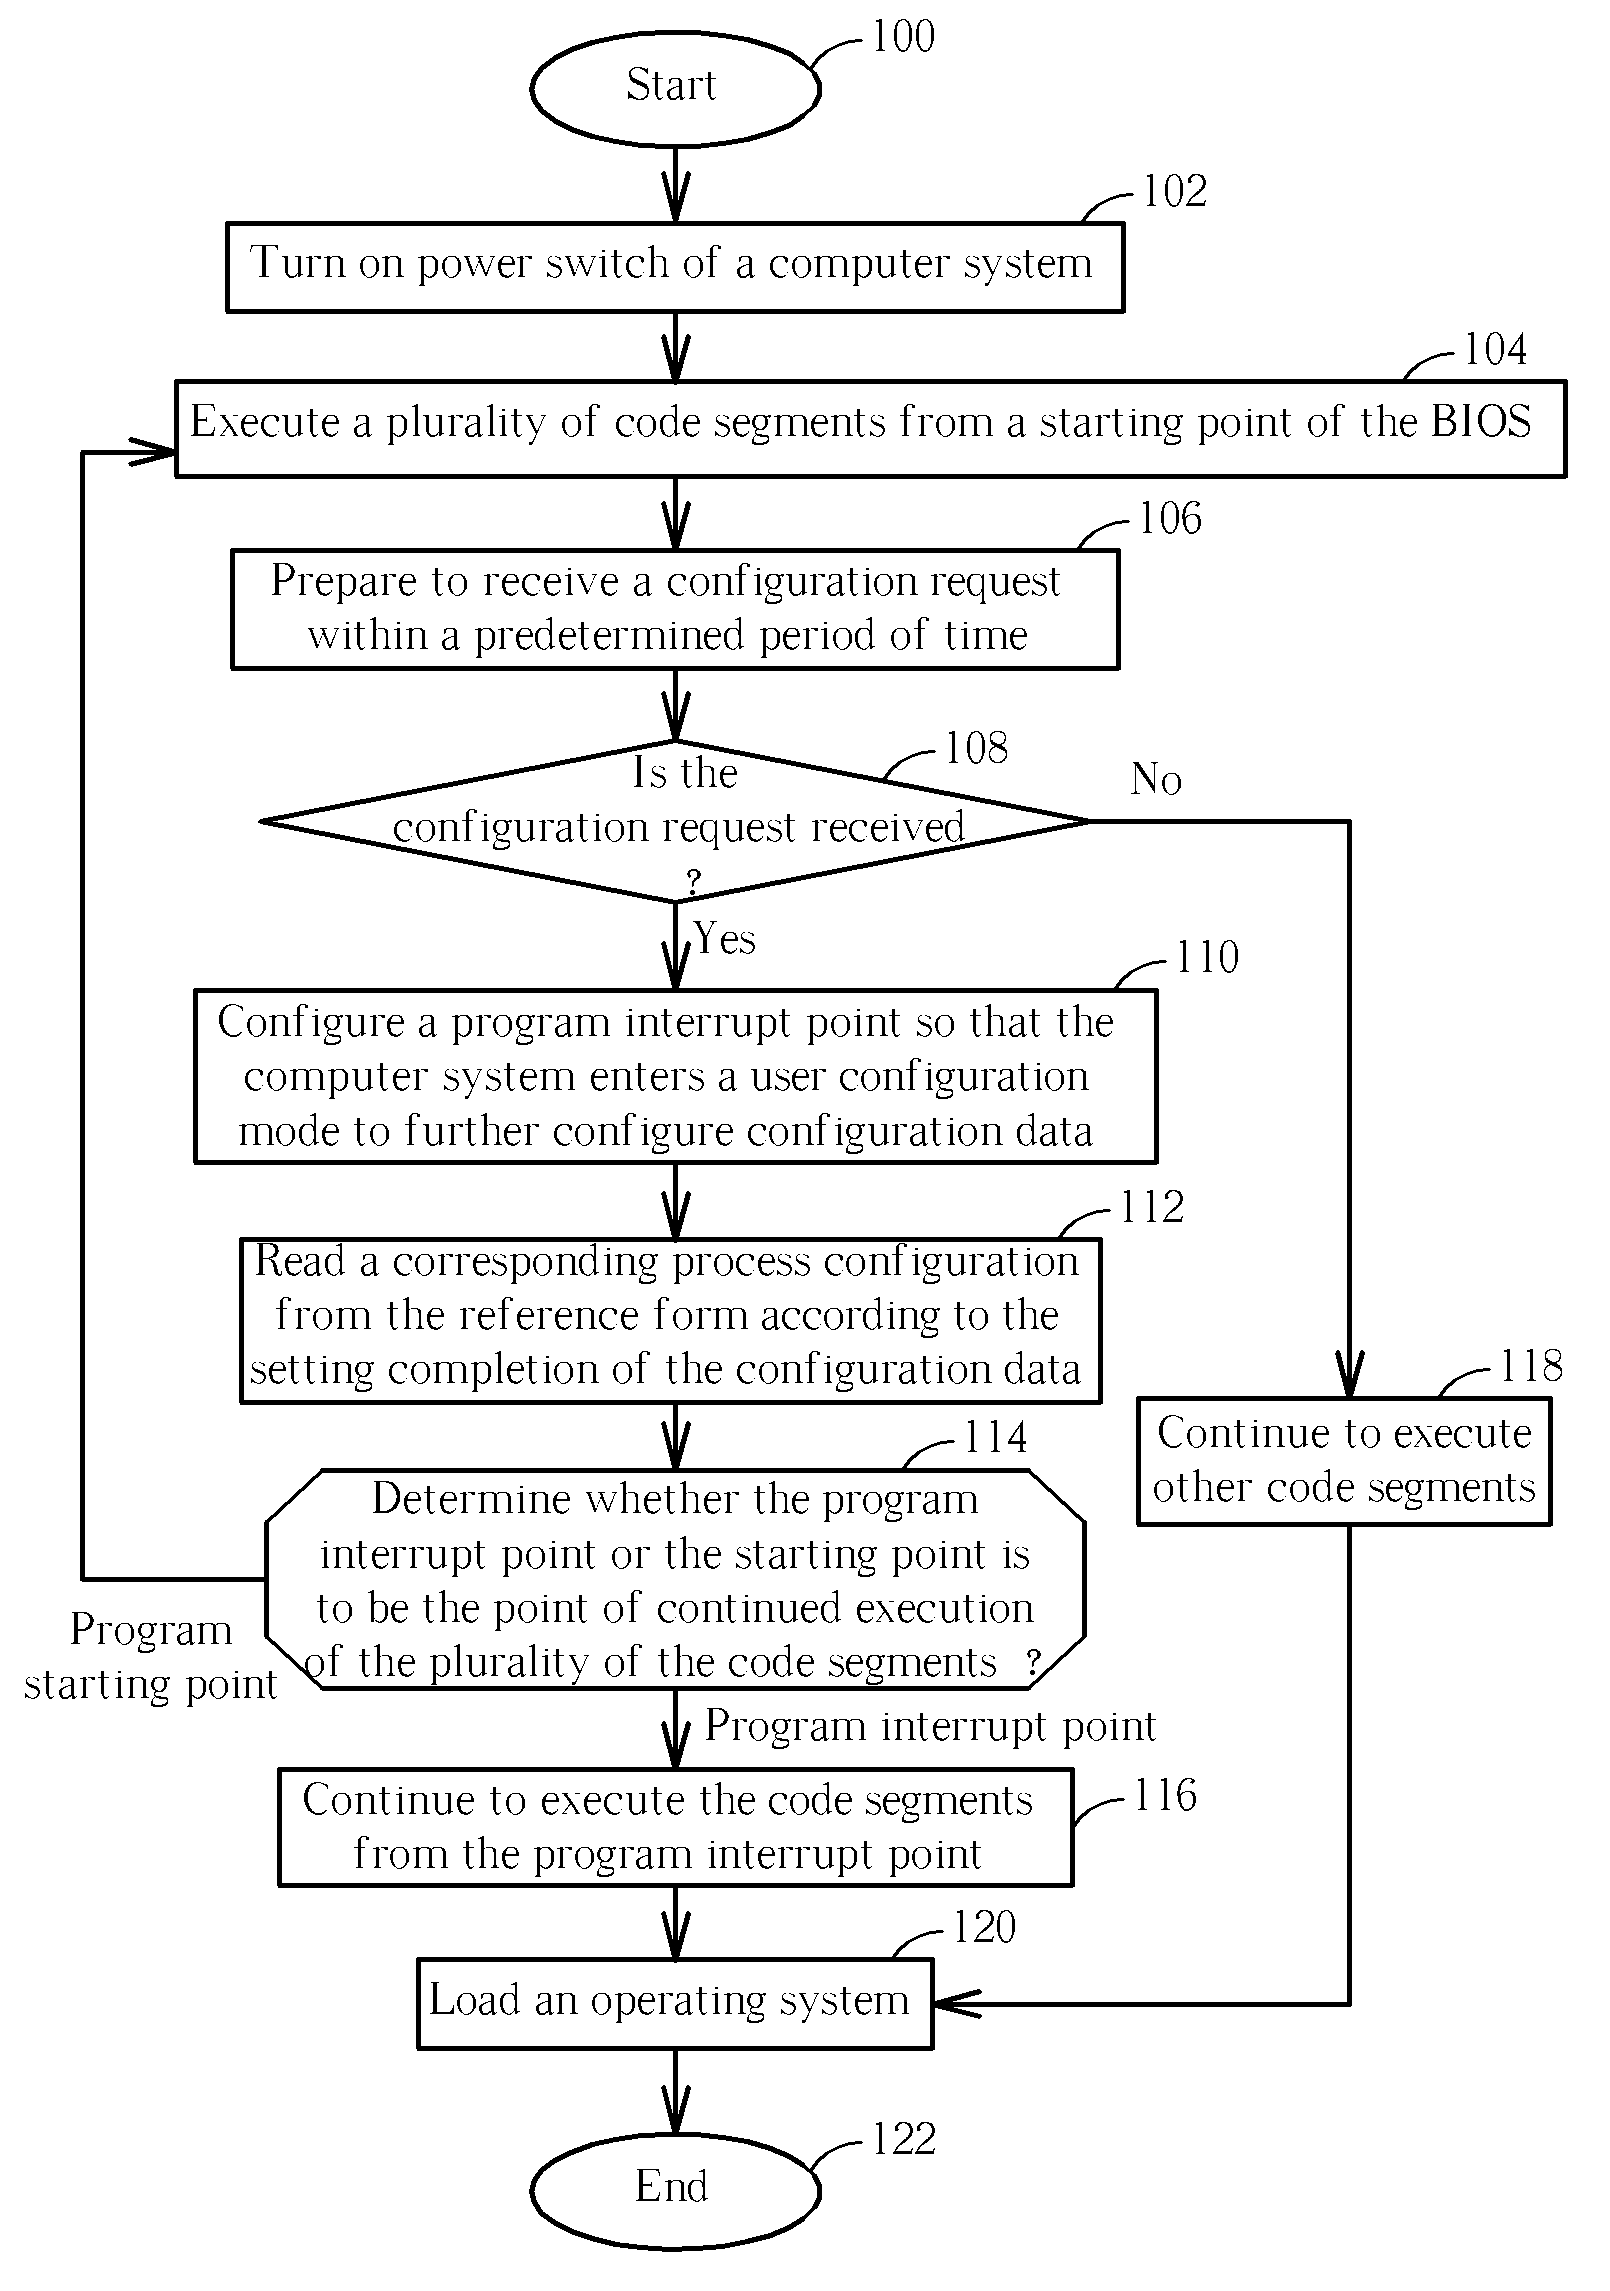 Method for Booting a Computer System